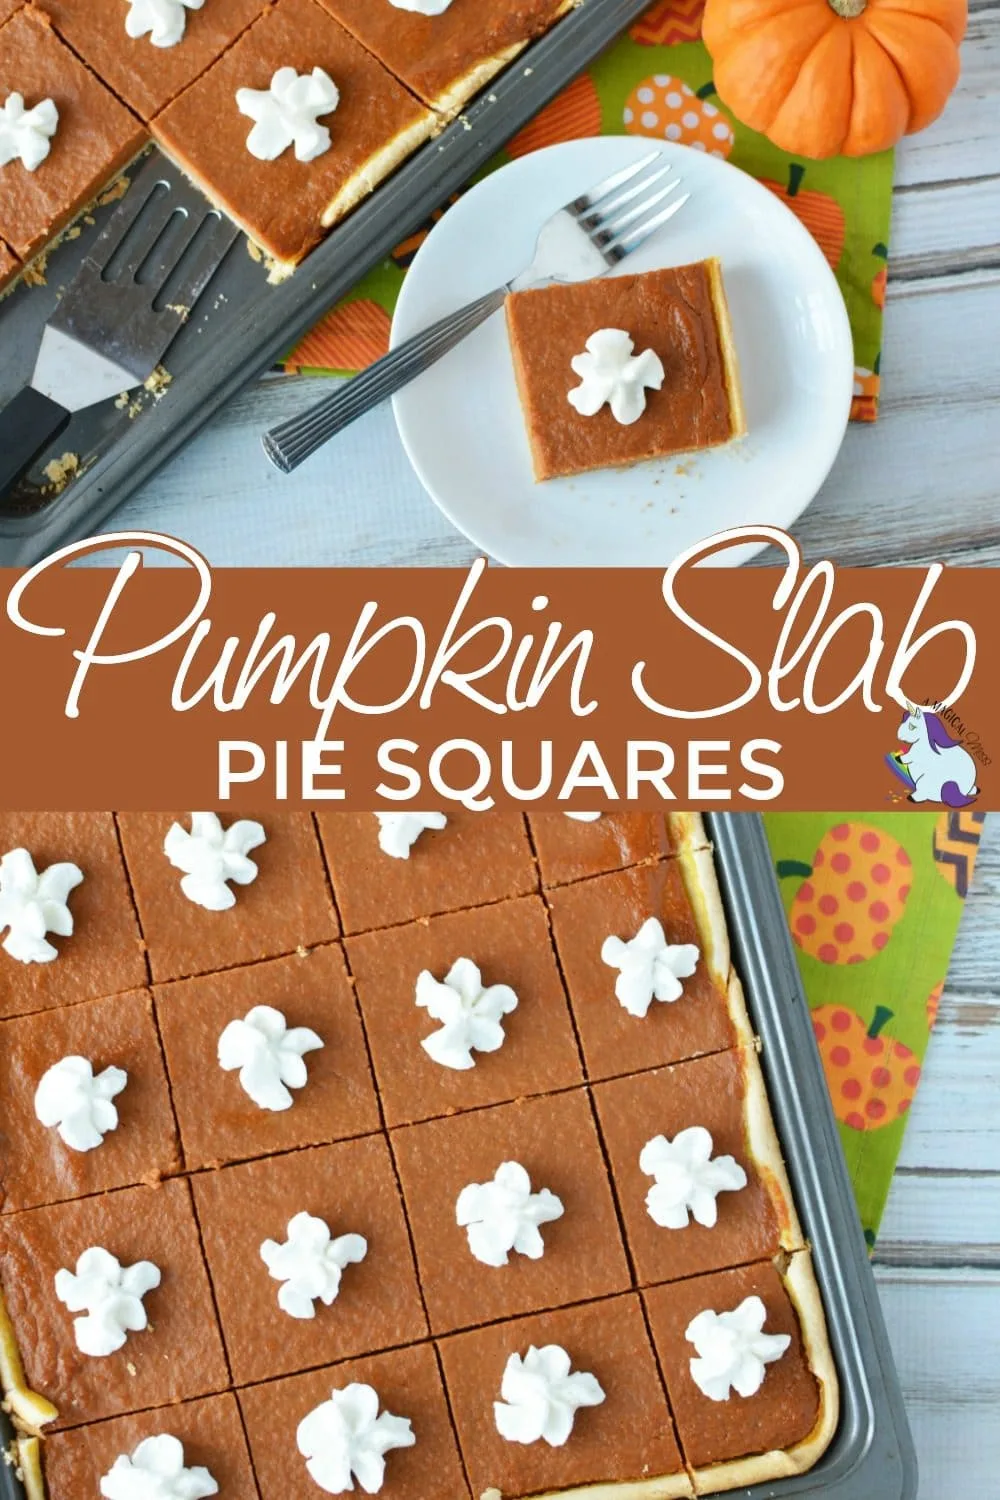 Pumpkin pie square on a plate and the whole tray of pumpkin slices. 